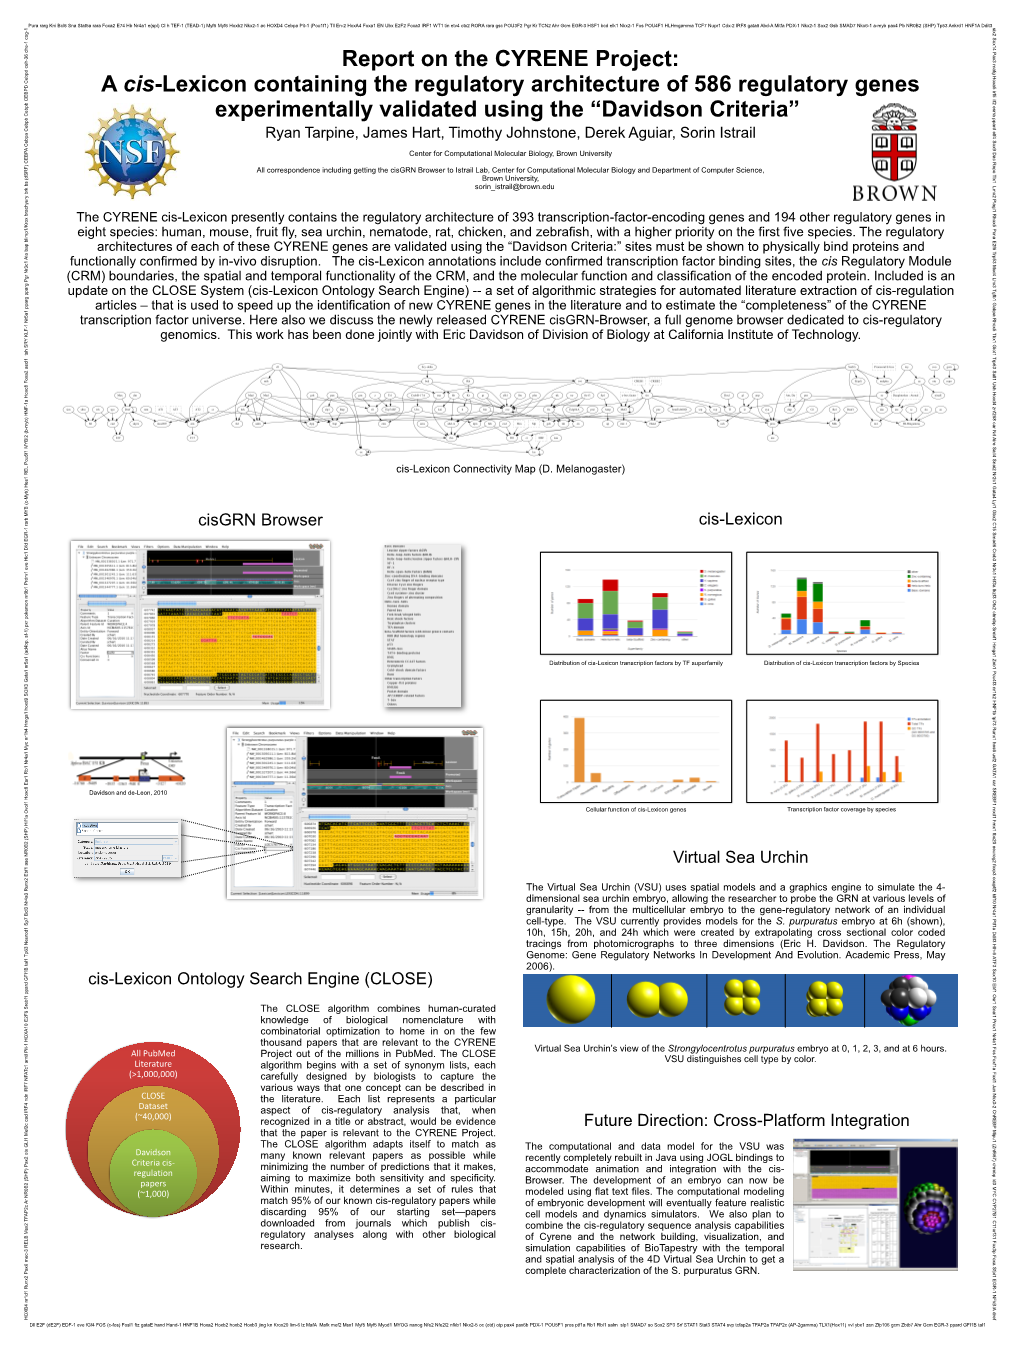 Poster Presented at the Developmental